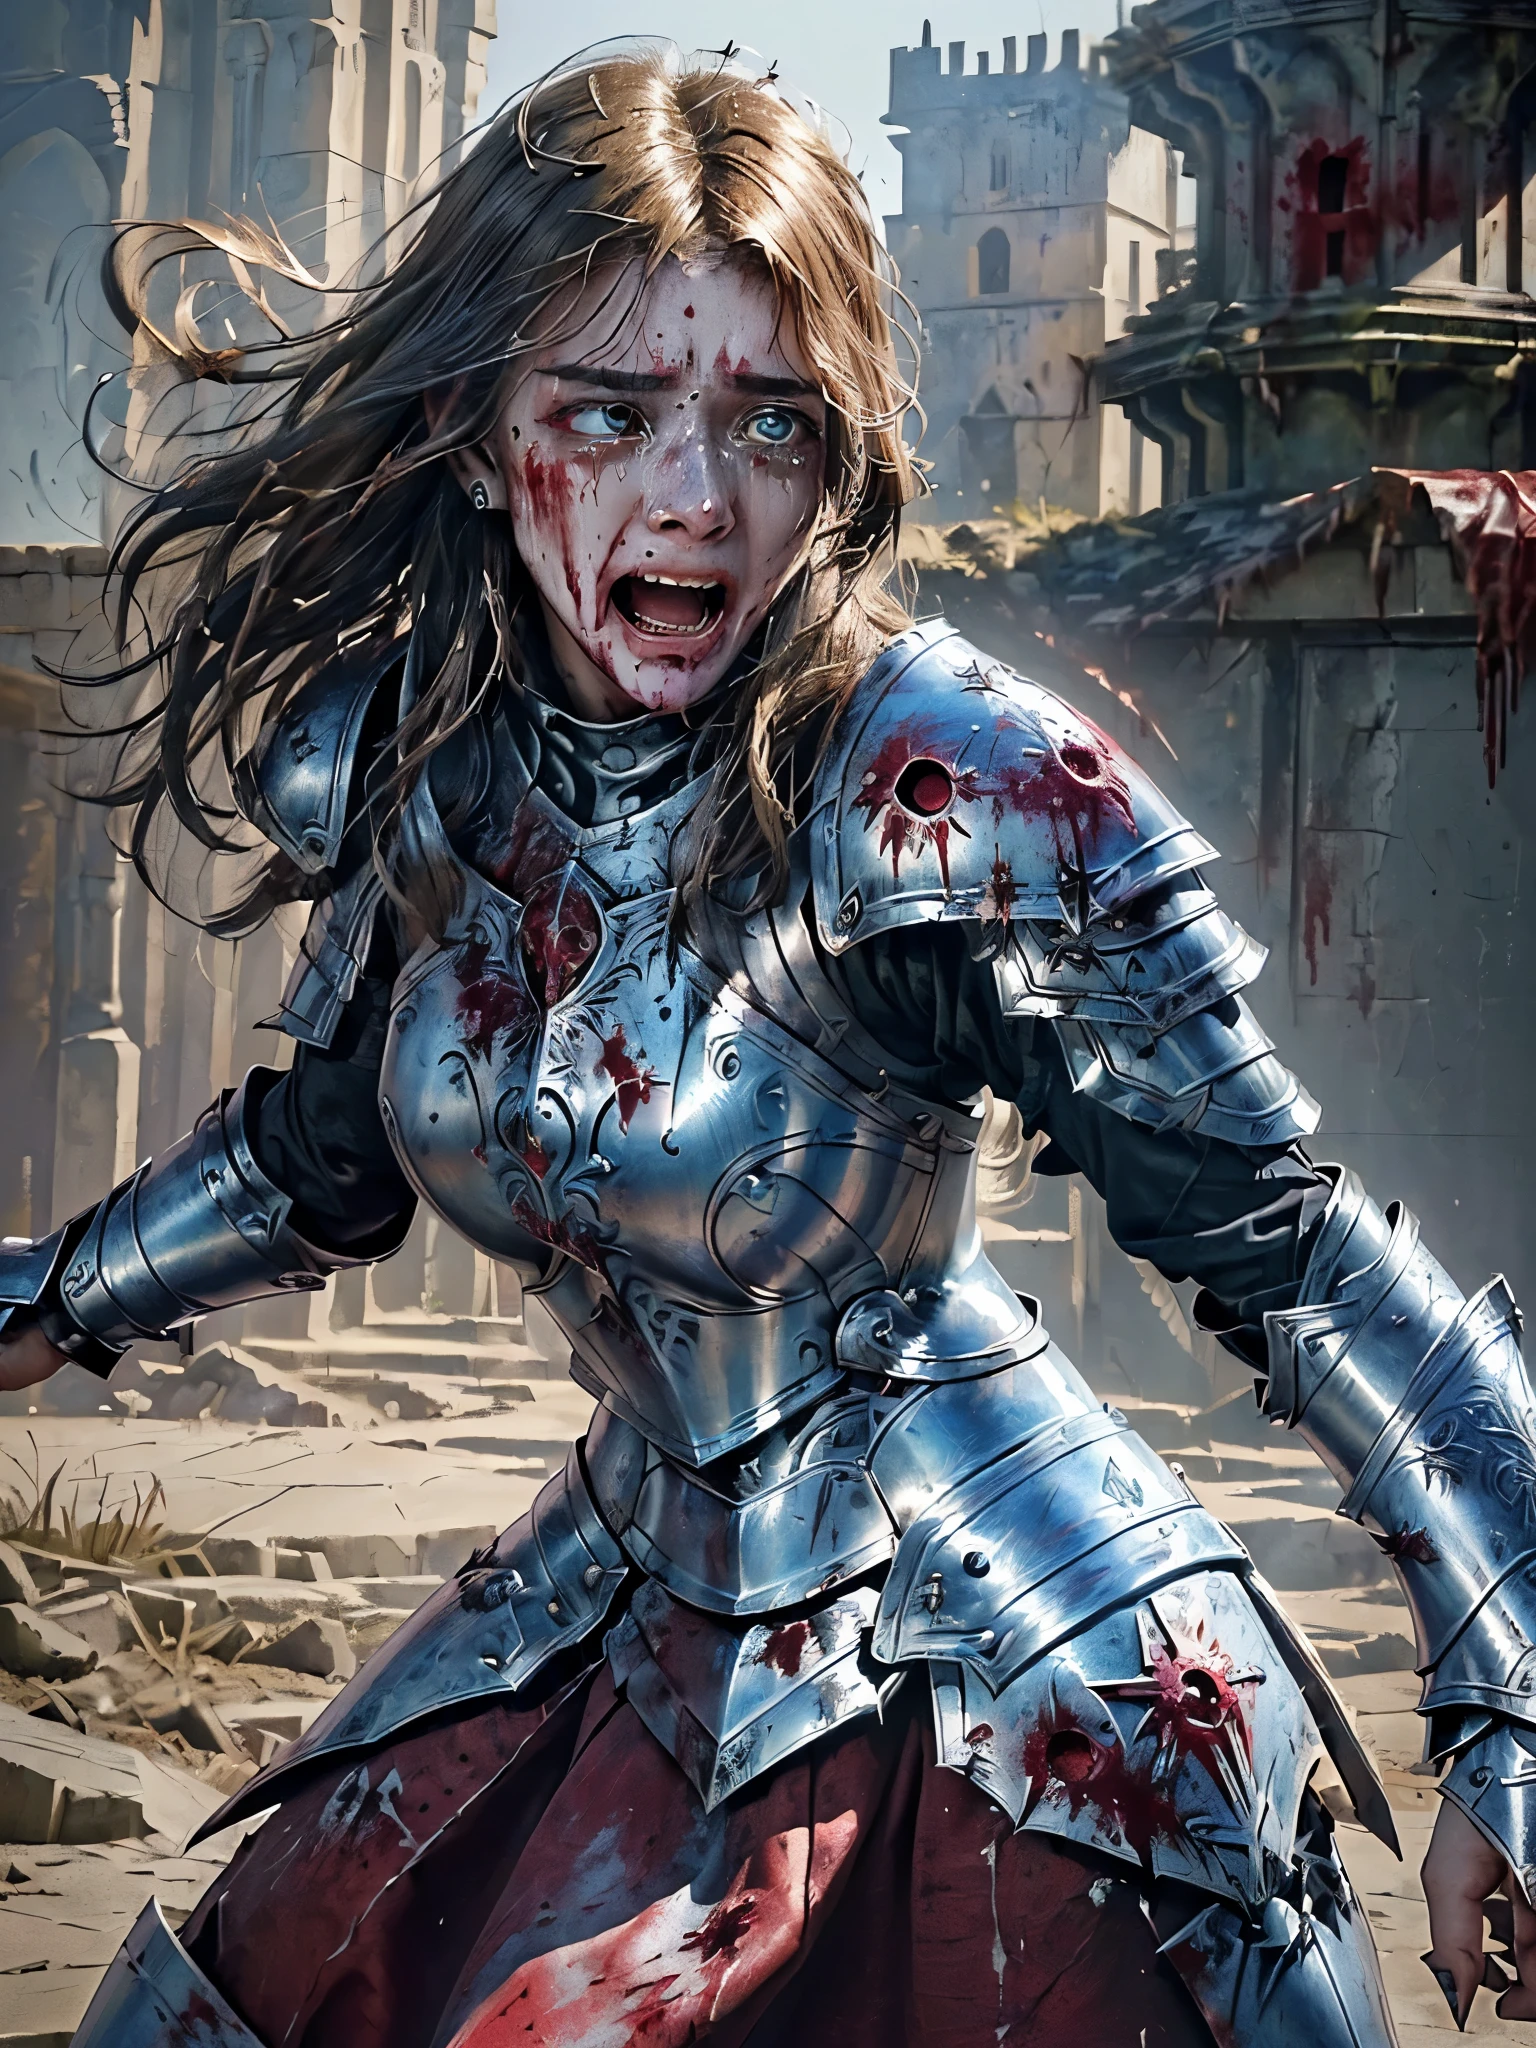 masterpiece, best quality photo,, (medieval fantasy:1.4), a beautiful 25 years old princess female knight is screaming in pain and crying, (detailed clothes; engraved metal armor with blood, blood splatted on armor:1.3), (detailed facial expression; extremely beautiful, grimace, screaming, wide open eyes in horror:1.3), rich matted hair:1.1, ((blood splatted armor:1.4)), (crying and terrified facial expression:1.5)